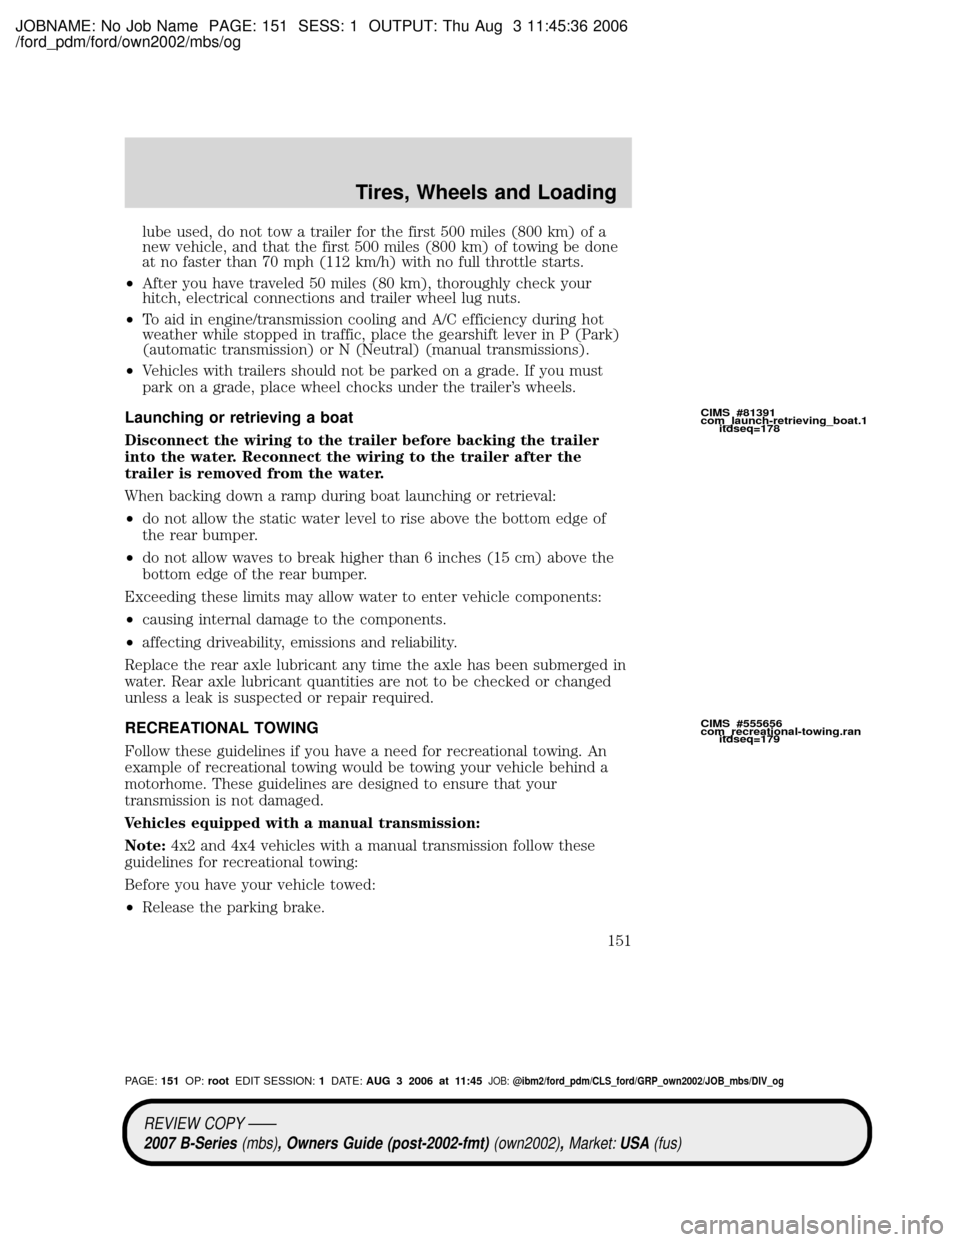 MAZDA MODEL B4000 TRUCK 2007  Owners Manual (in English) JOBNAME: No Job Name PAGE: 151 SESS: 1 OUTPUT: Thu Aug 3 11:45:36 2006
/ford_pdm/ford/own2002/mbs/og
lube used, do not tow a trailer for the first 500 miles (800 km) of a
new vehicle, and that the fir